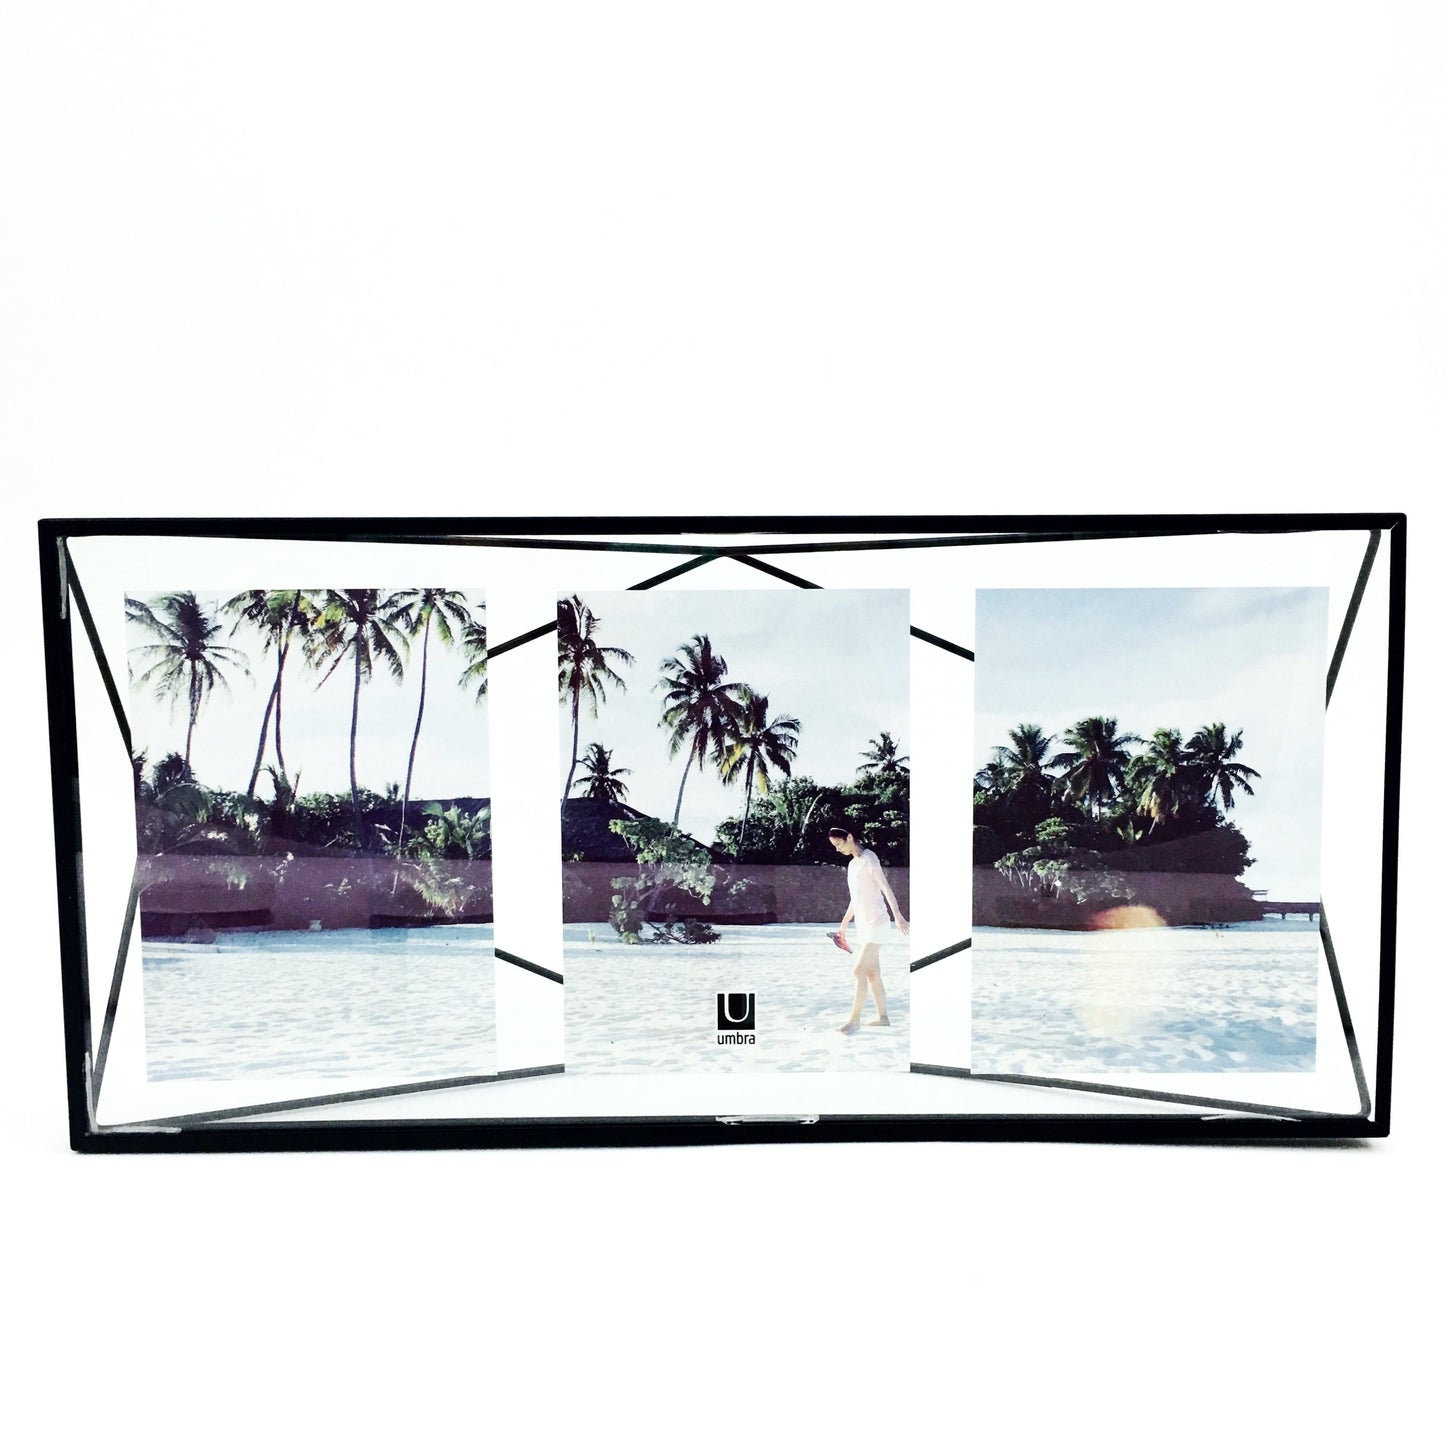 "Prisma" Picture Frames in Black by Umbra - Multi - Holds Three 5 x 7 inch Photos by Umbra - K. A. Artist Shop